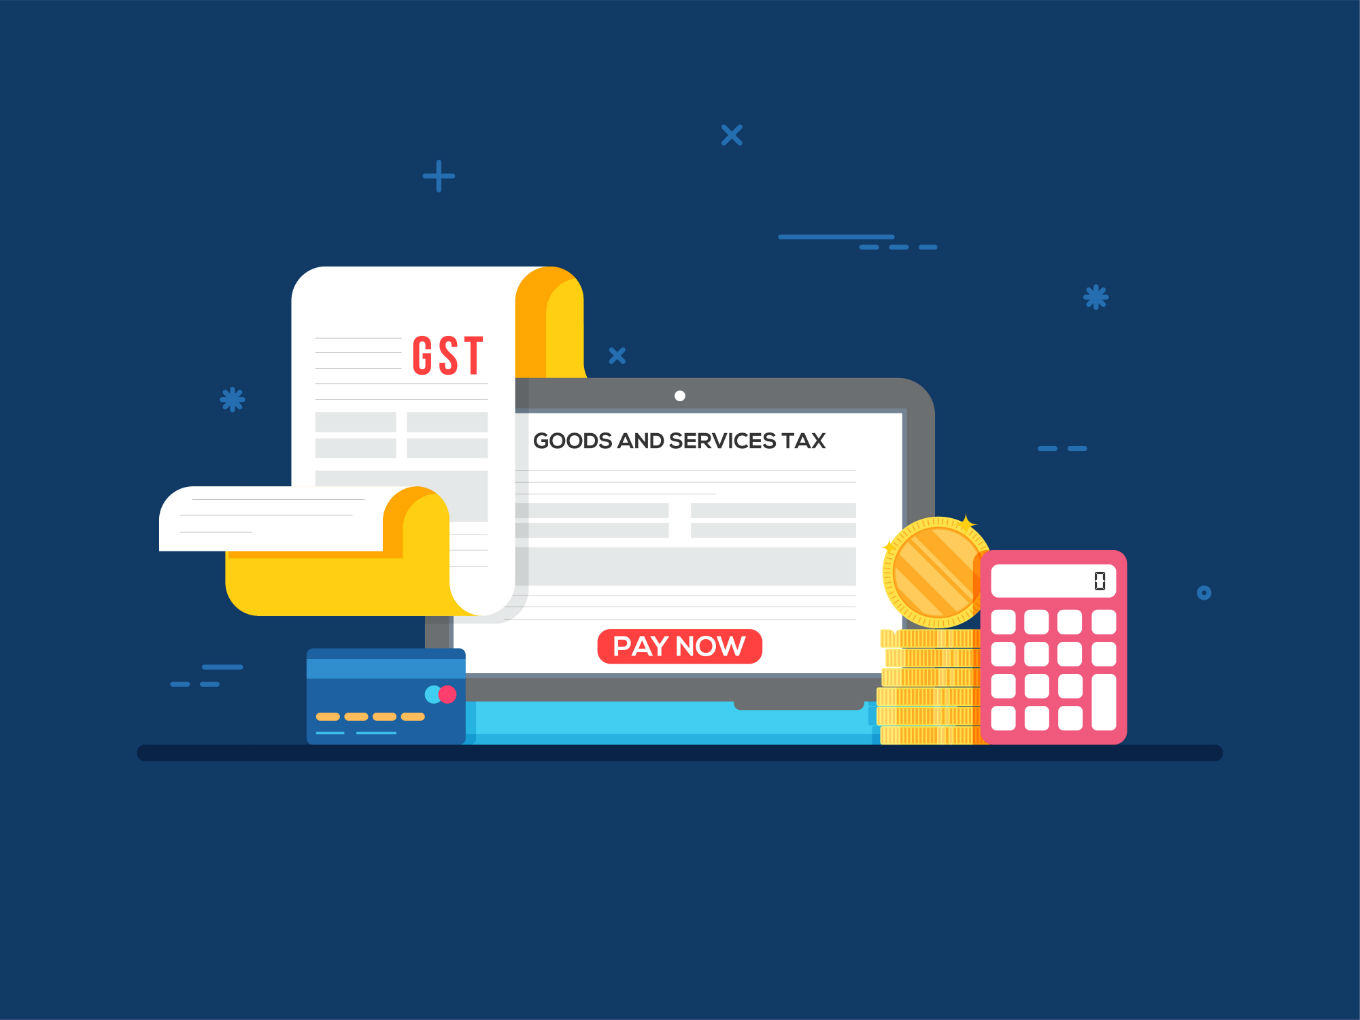 Will GSTN’s Tax Software Give A Hard Time To Existing GST Software Makers?